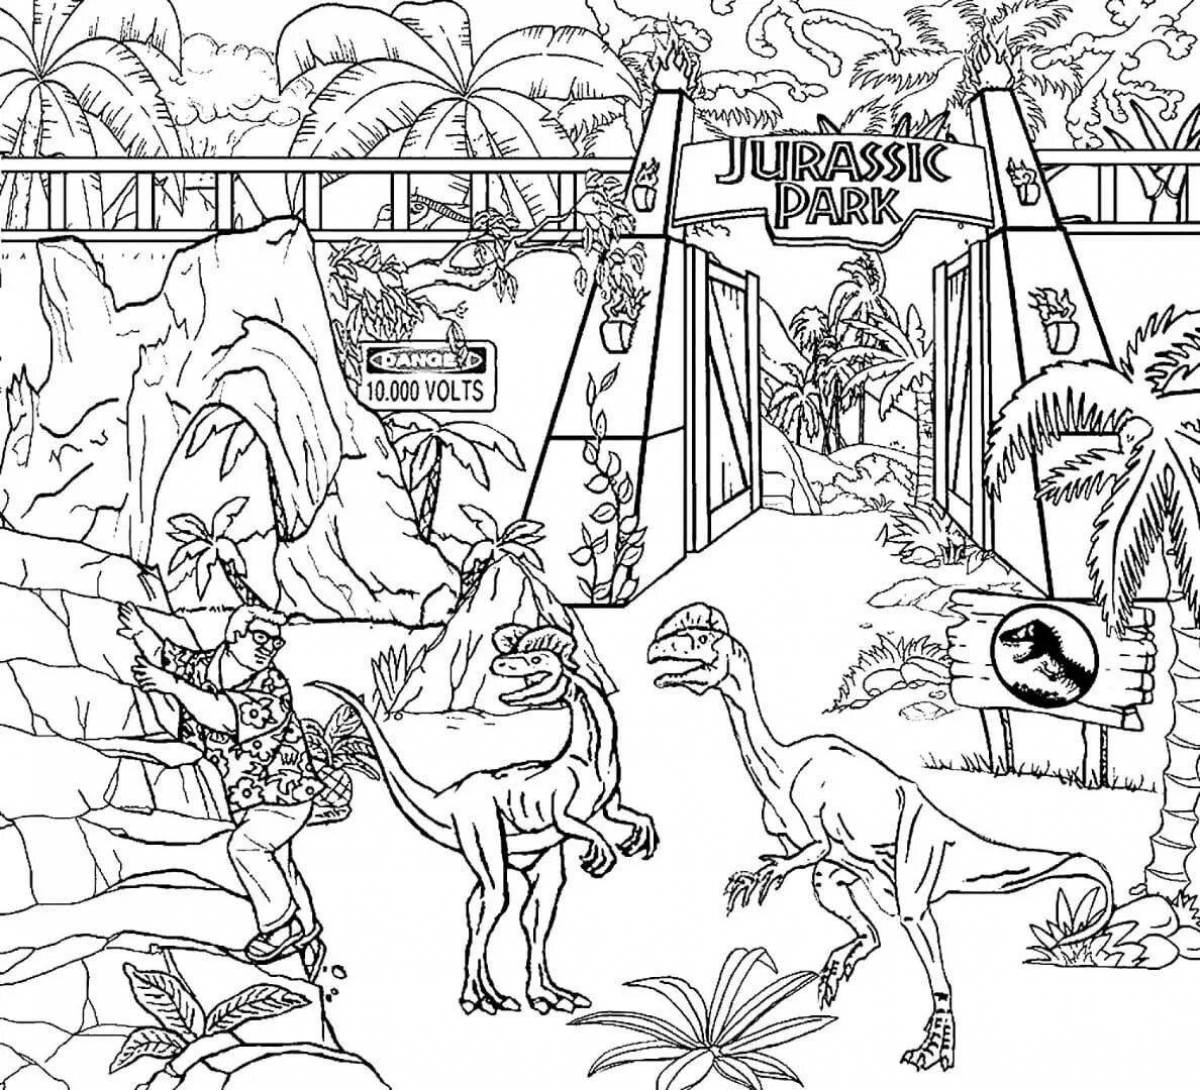 Exciting jurassic park coloring book